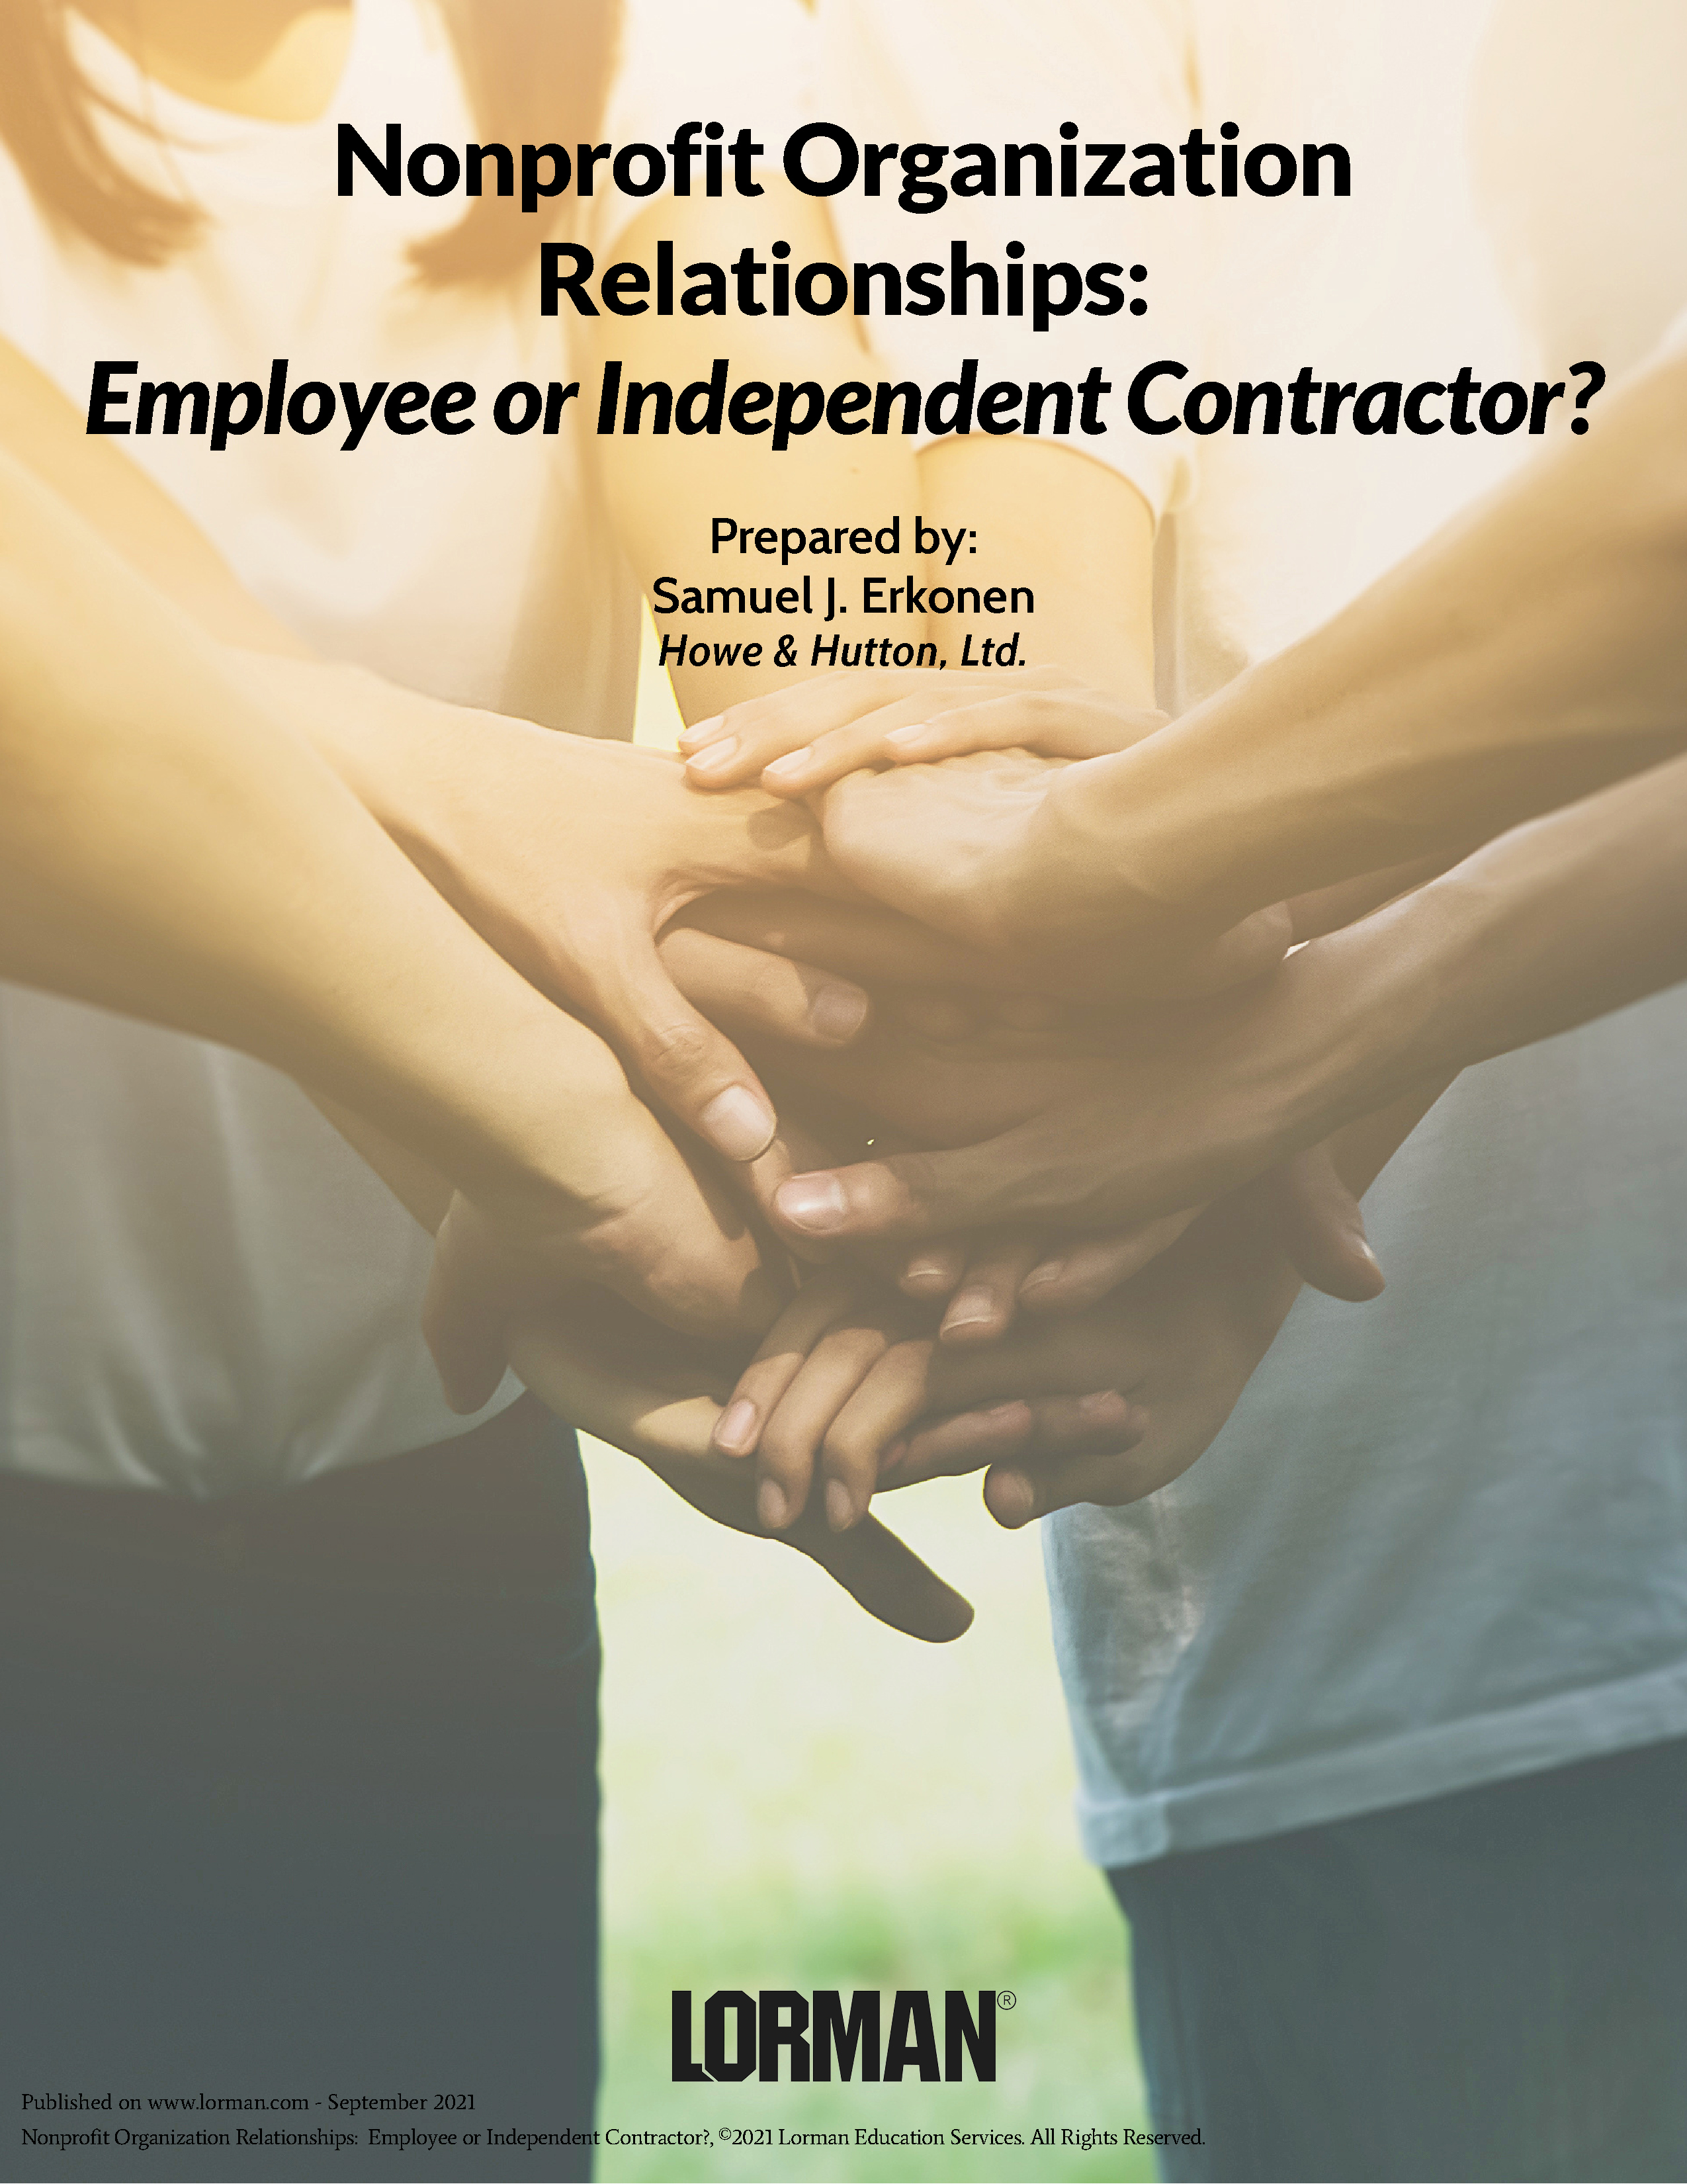 Nonprofit Organization Relationships: Employee or Independent Contractor?